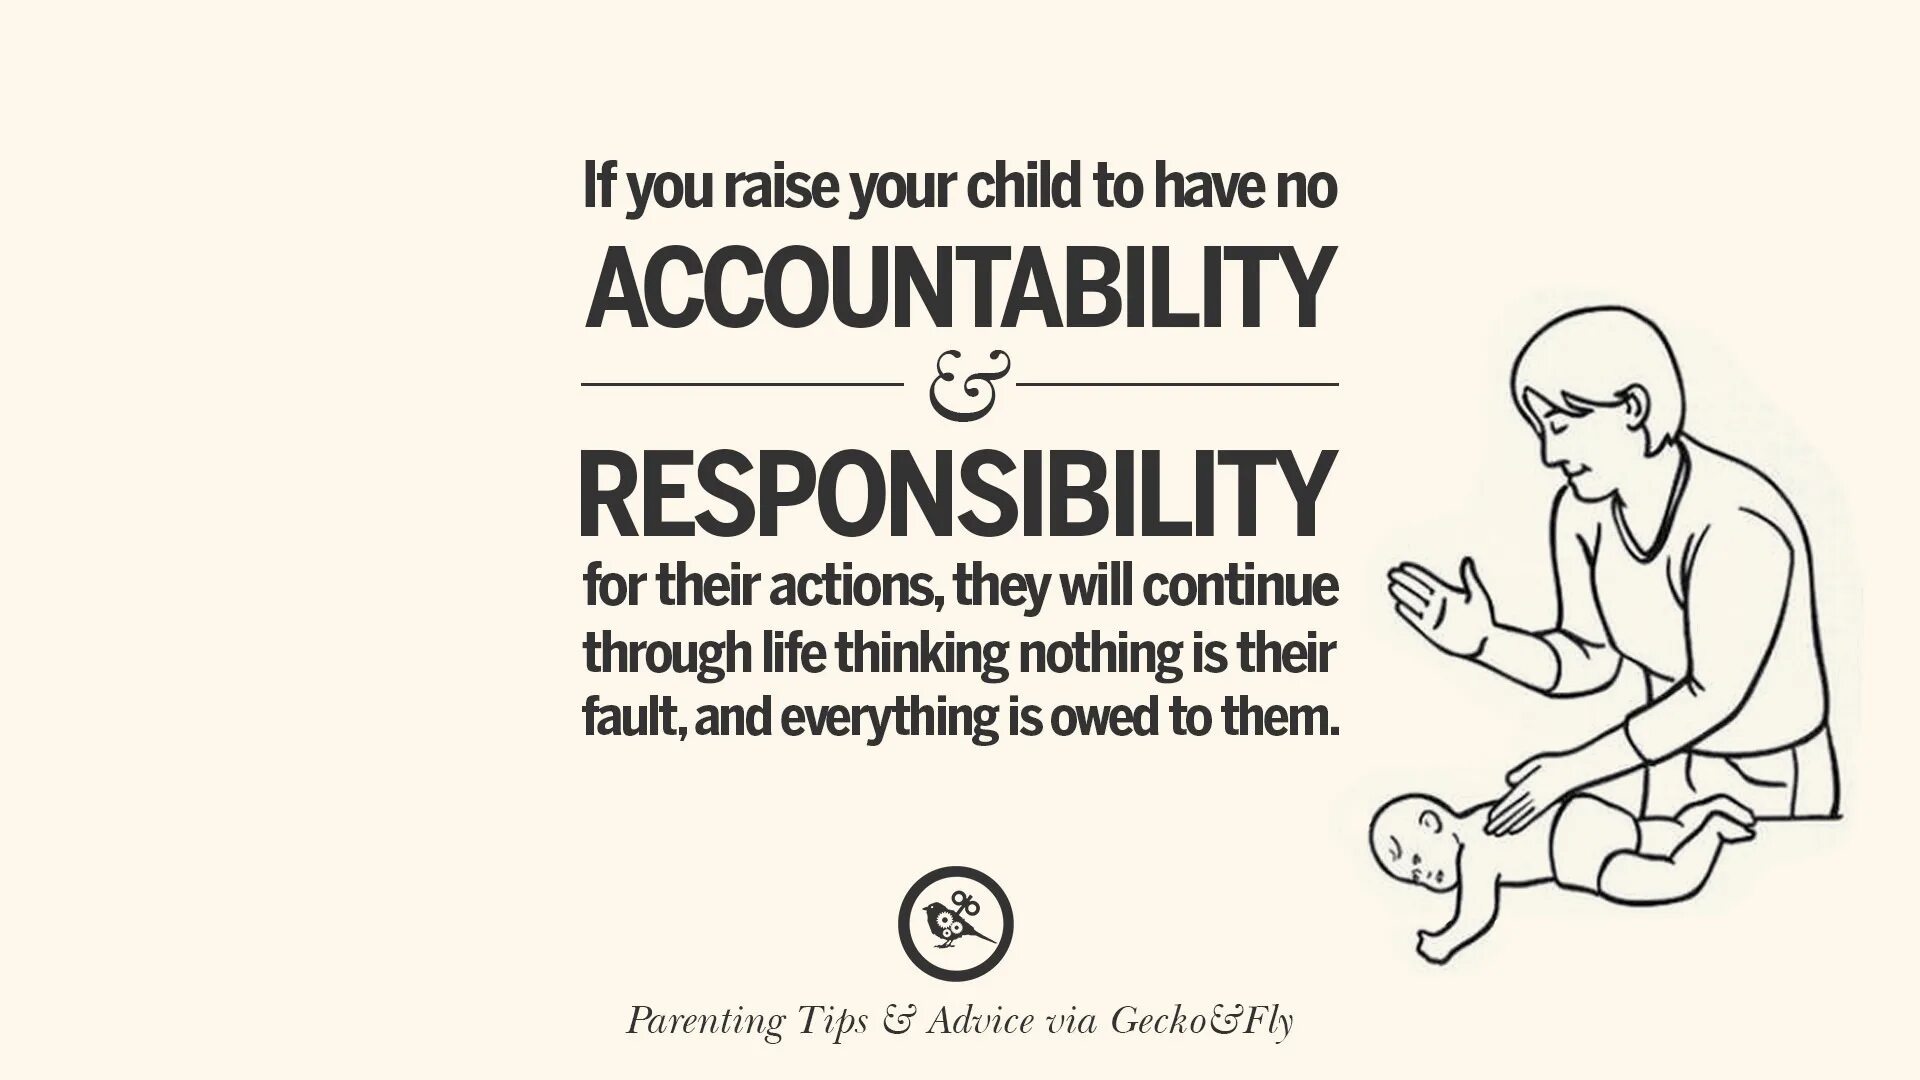 Will i take the children. Take responsibility или have responsibility. Raise a child перевод. Quotations about childhood.